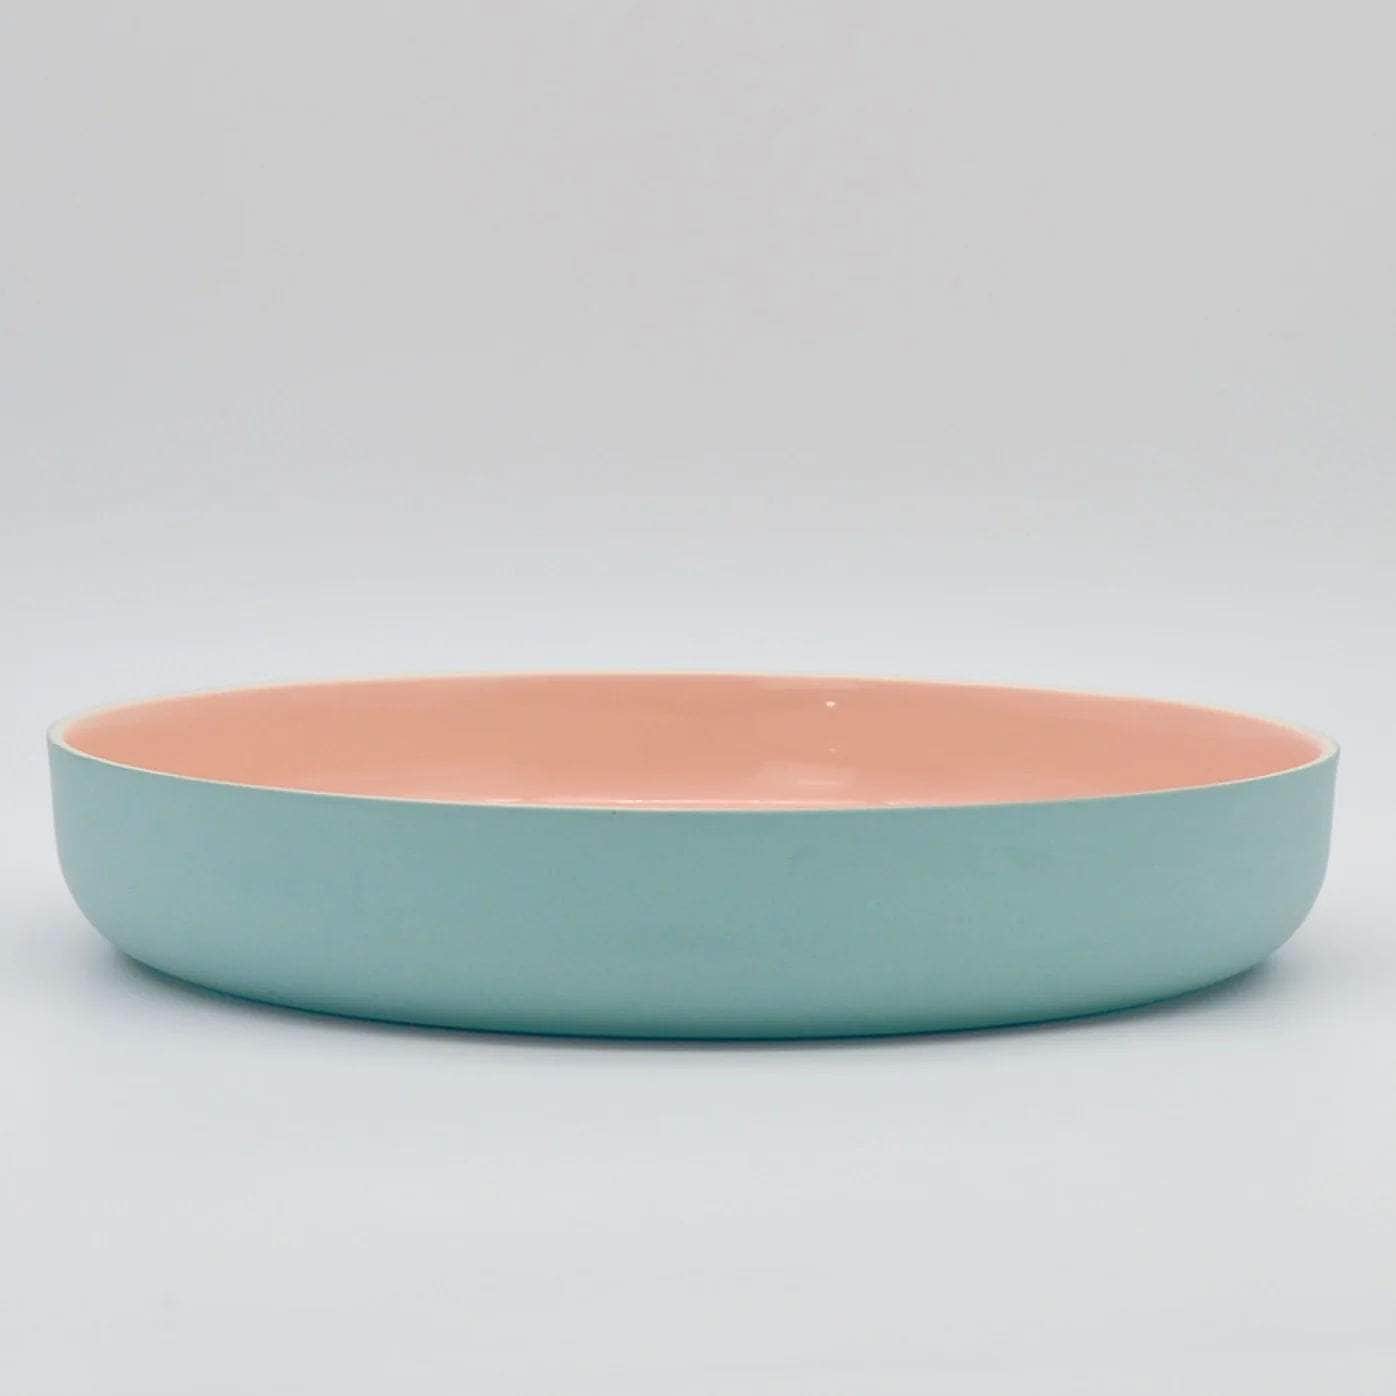 Serving Plate Turquoise